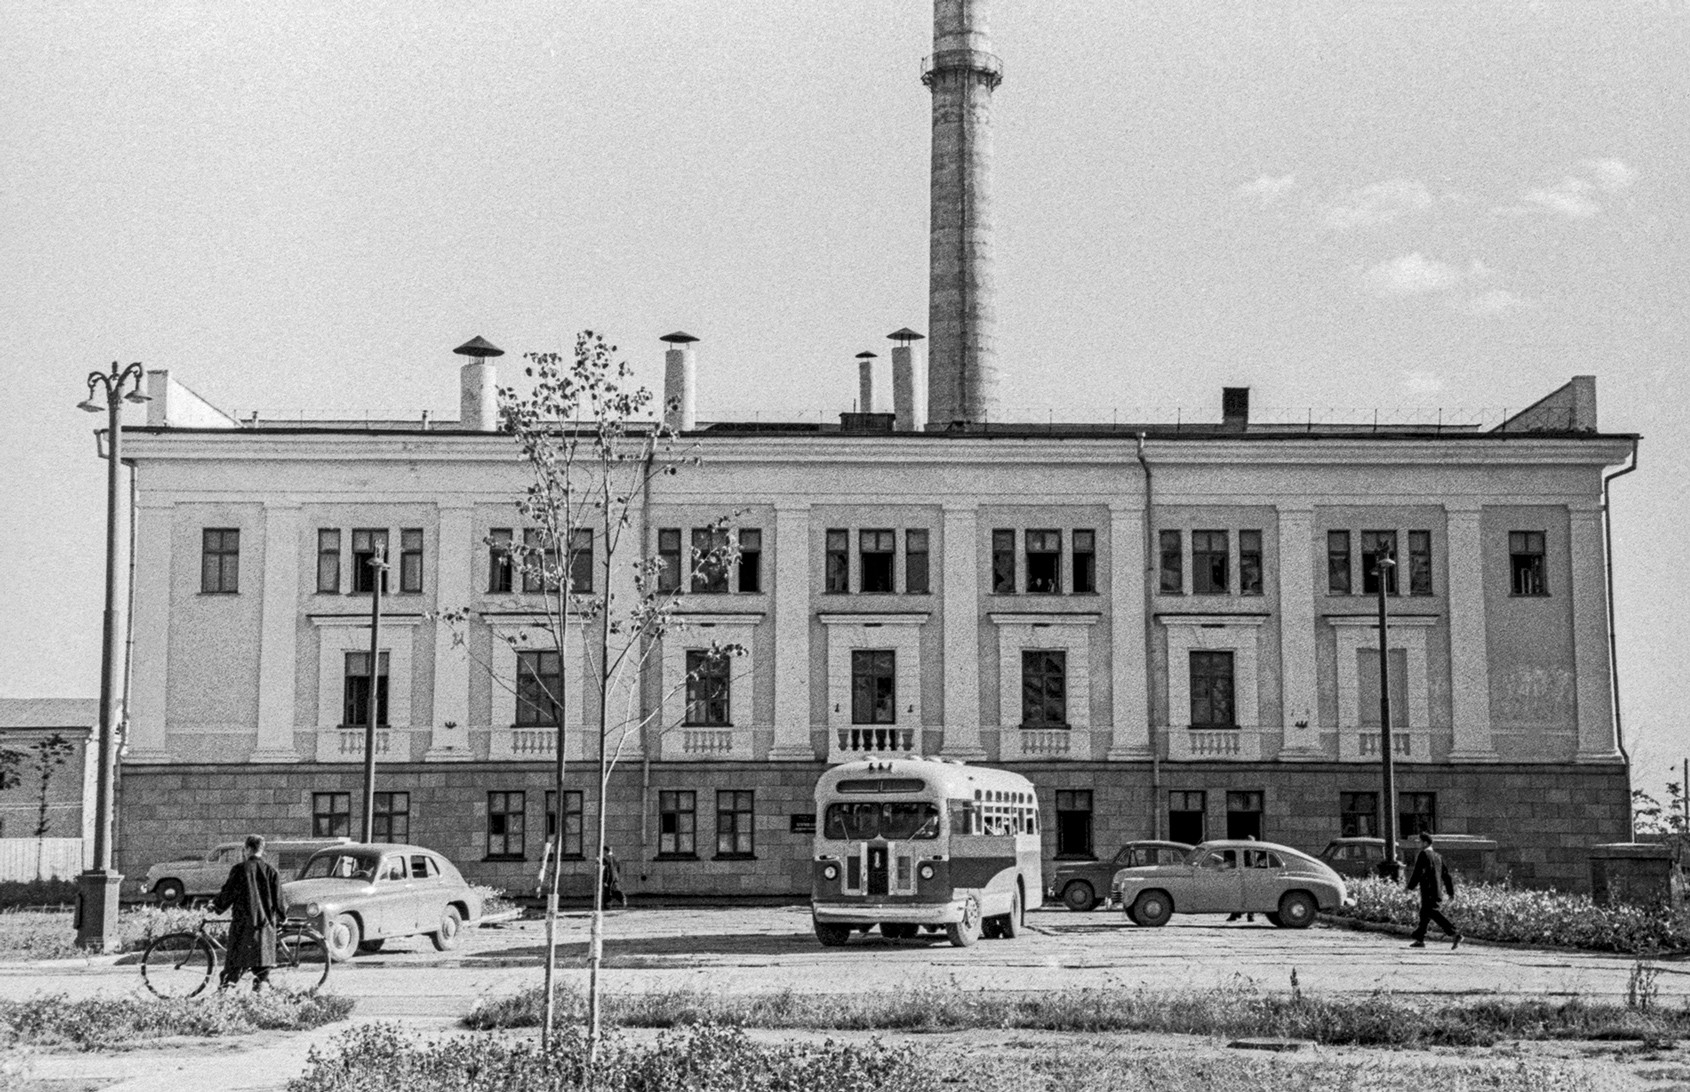 The world’s first industrial nuclear power plant in Russia's Obninsk. 1955.